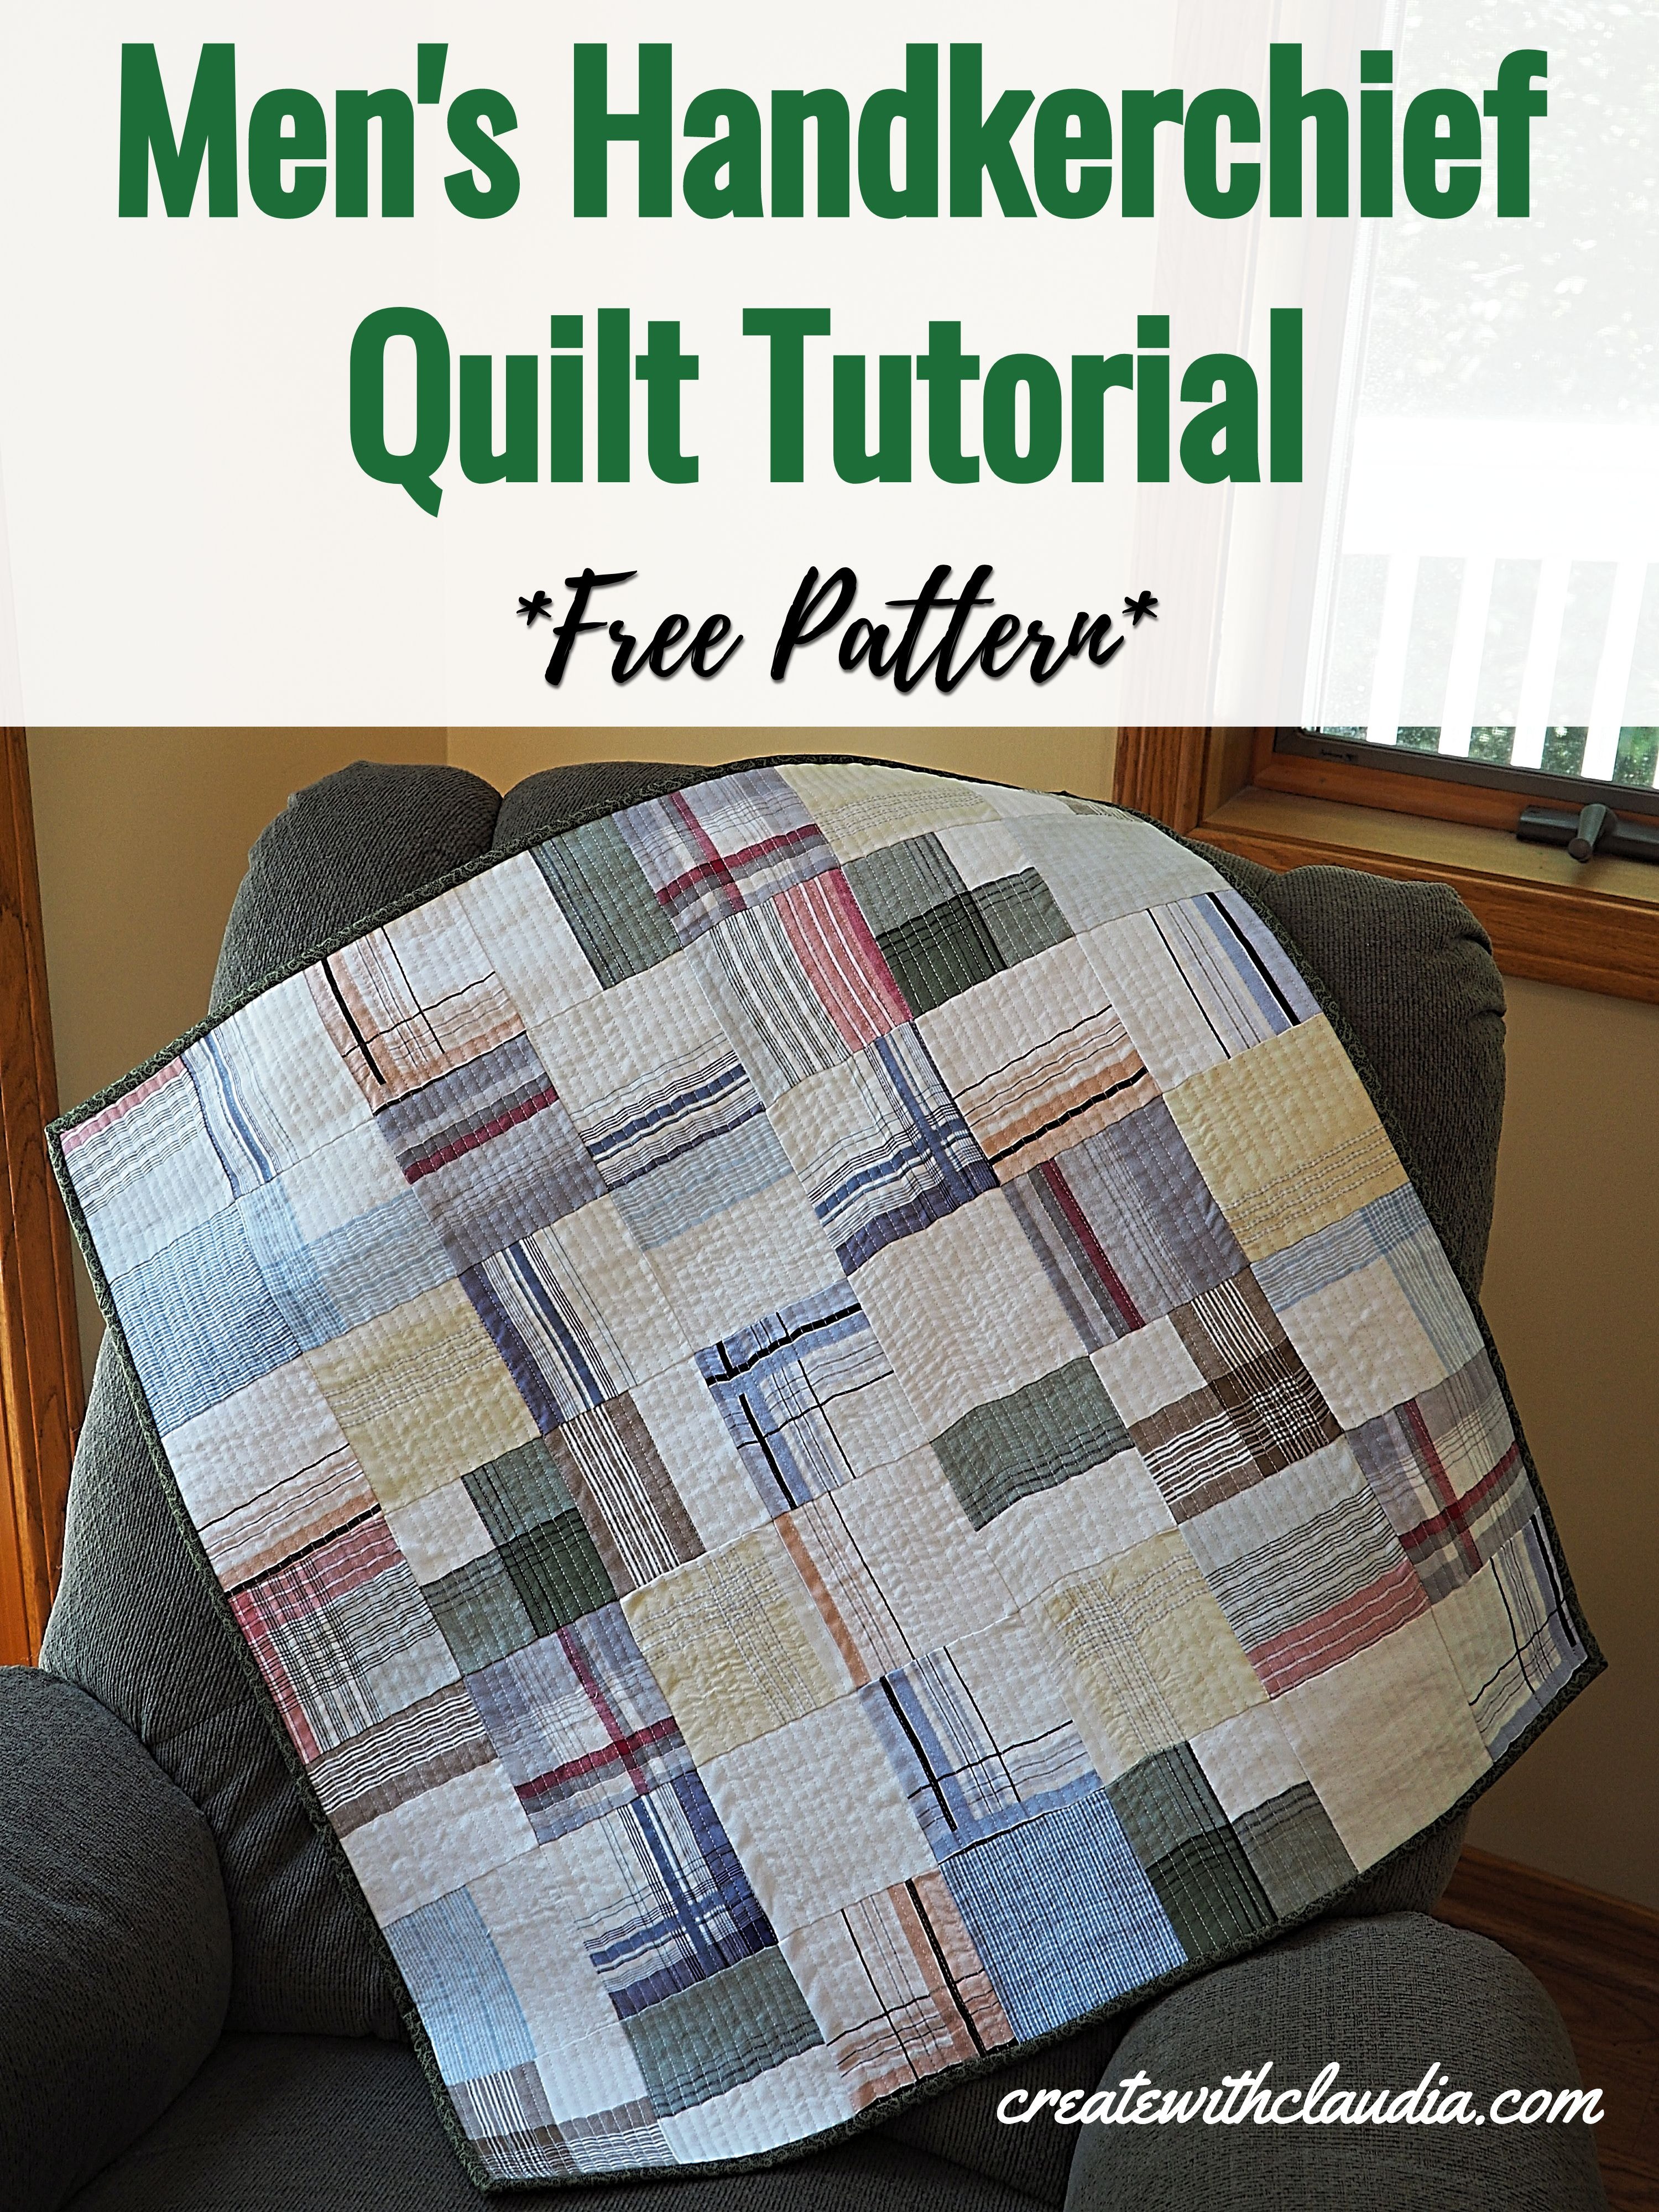 How To Cut Plaids for Squares & Rectangles for Quilting With Men's